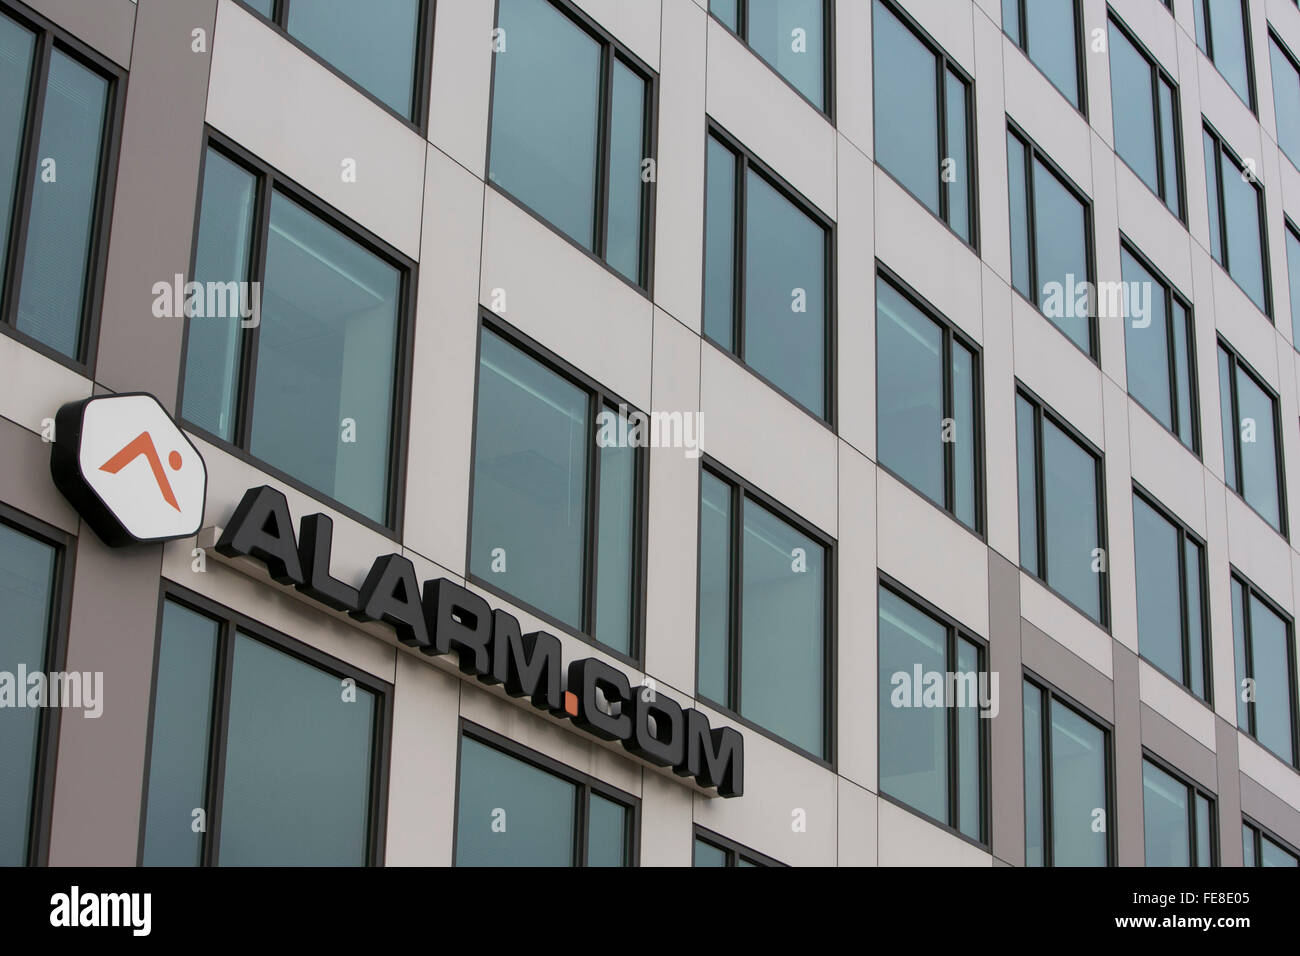 A logo sign outside of the headquarters of Alarm.com, Inc., in Tysons, Virginia on January 1, 2016. Stock Photo